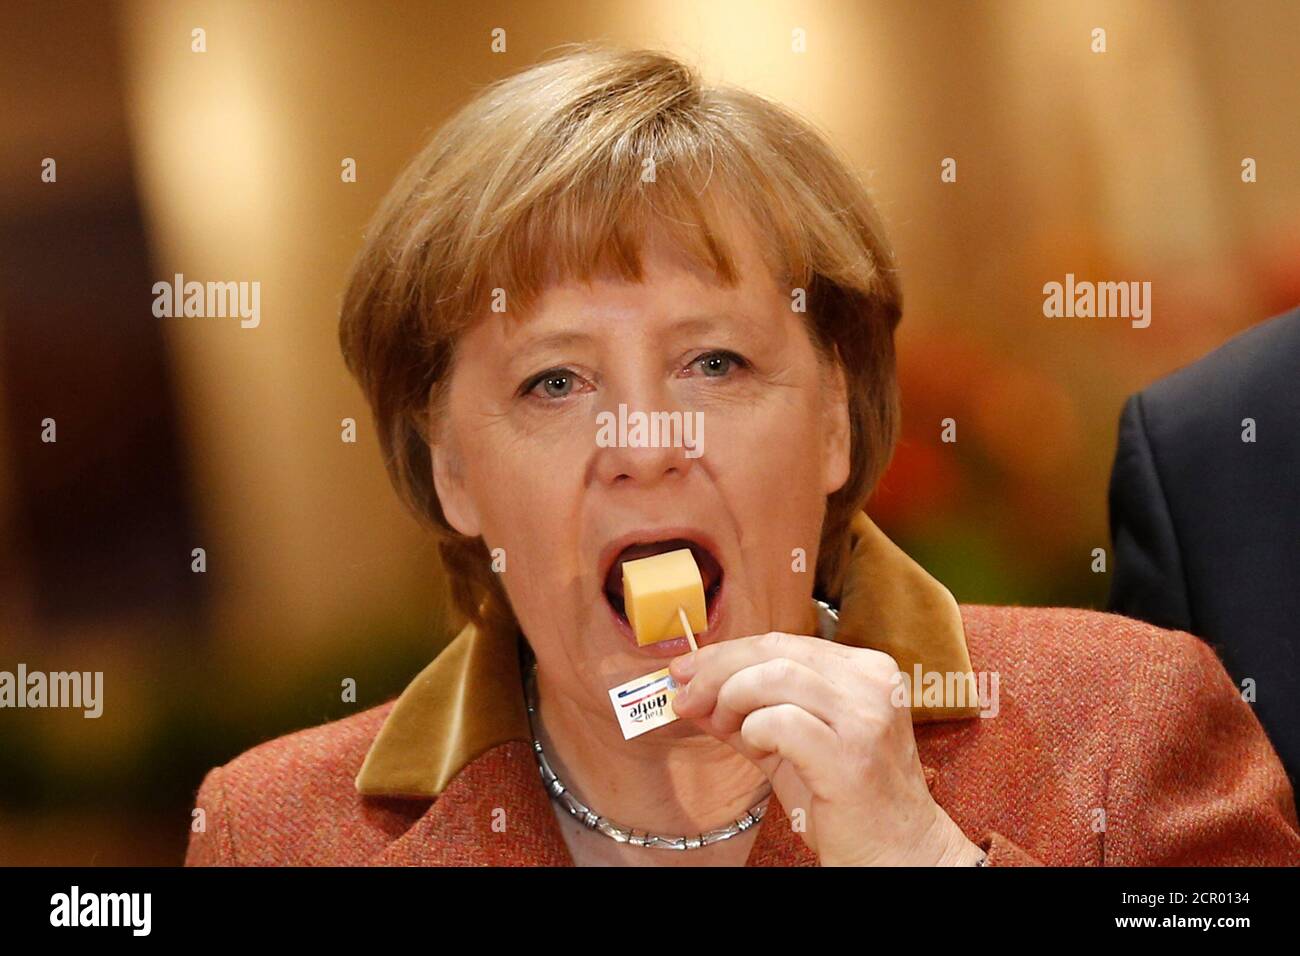 German Chancellor Angela Merkel samples cheese at the pavilion of the Netherlands at the Green Week agricultural fair in Berlin, January 18, 2013. The Netherlands are the partner nation of the Green Week this year.  REUTERS/Thomas Peter  (GERMANY  - Tags: POLITICS AGRICULTURE) Stock Photo